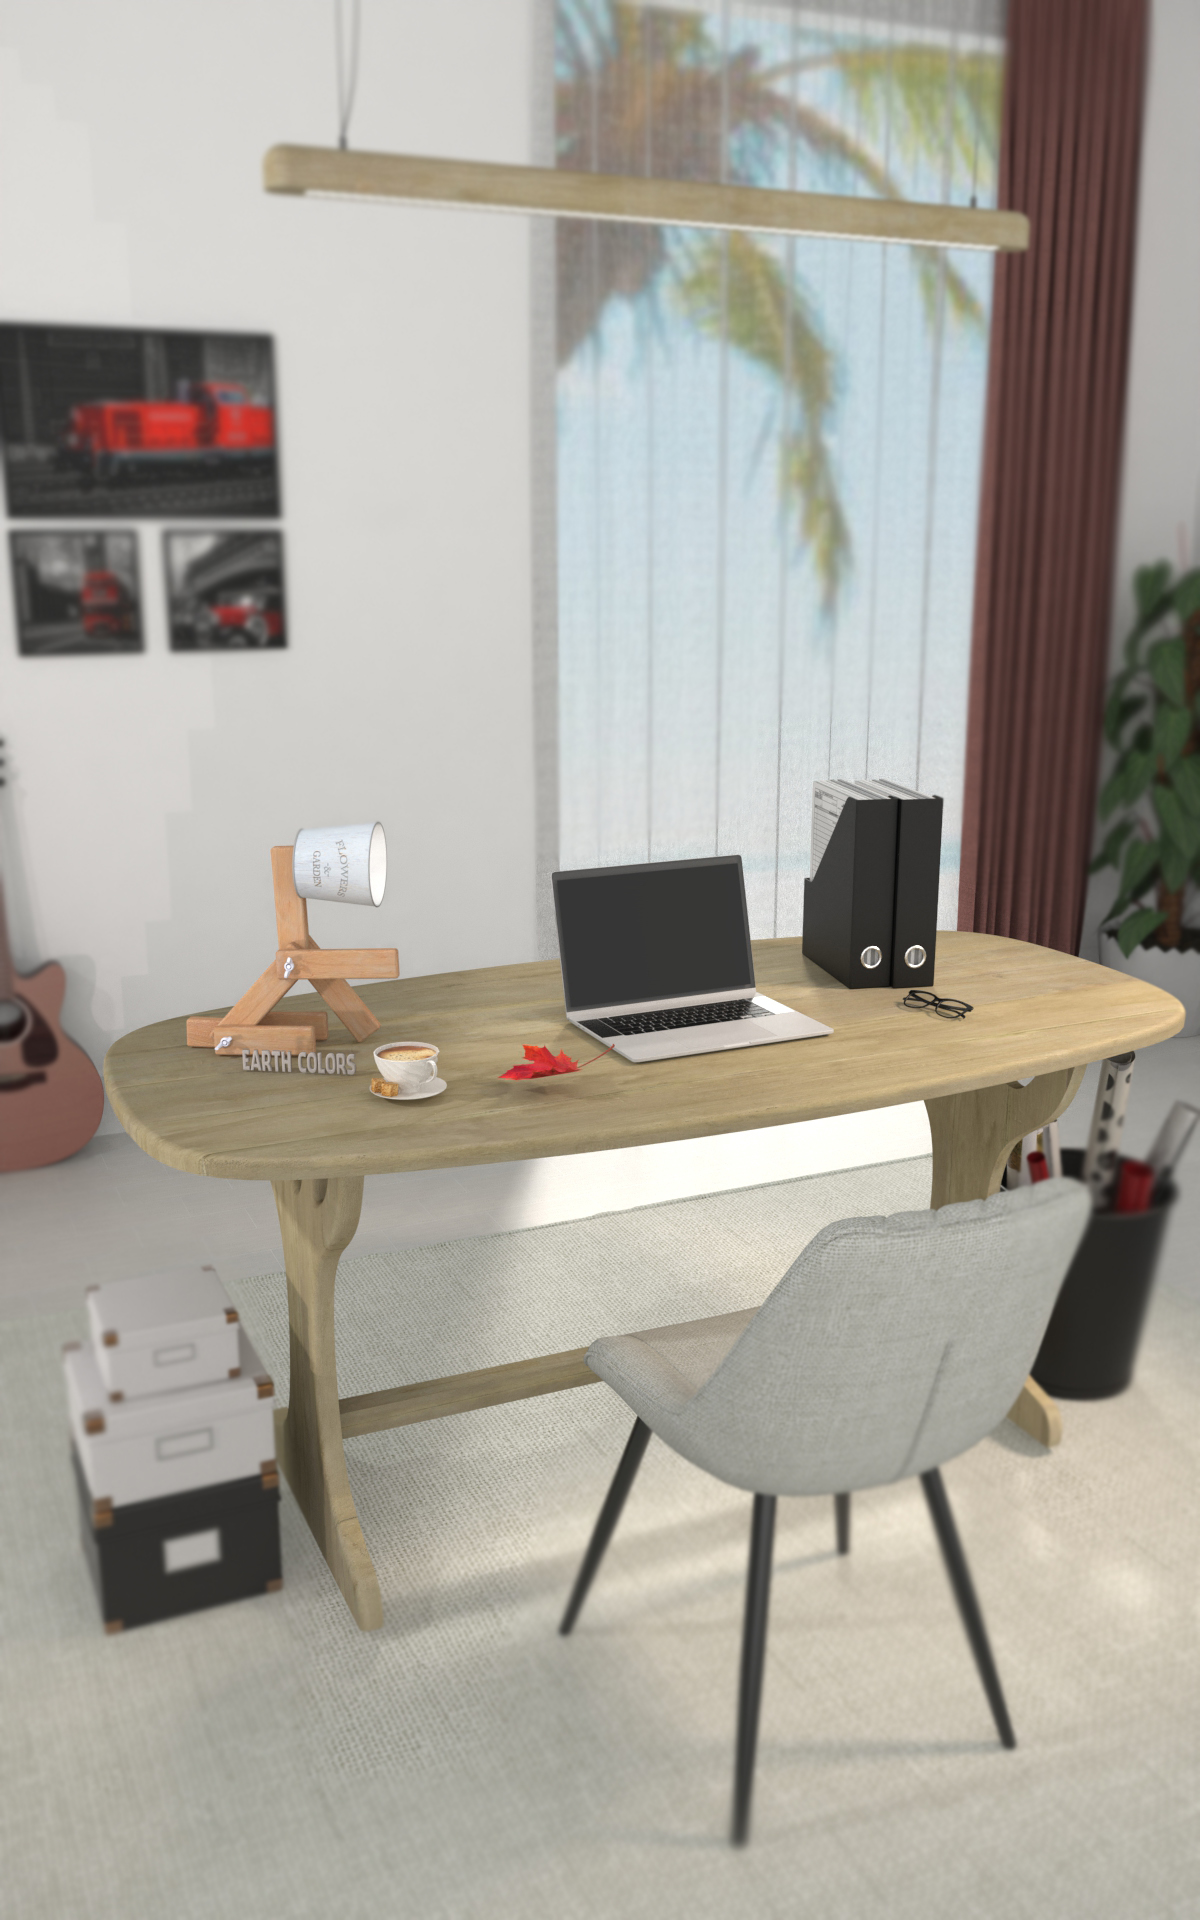 L shape table for office